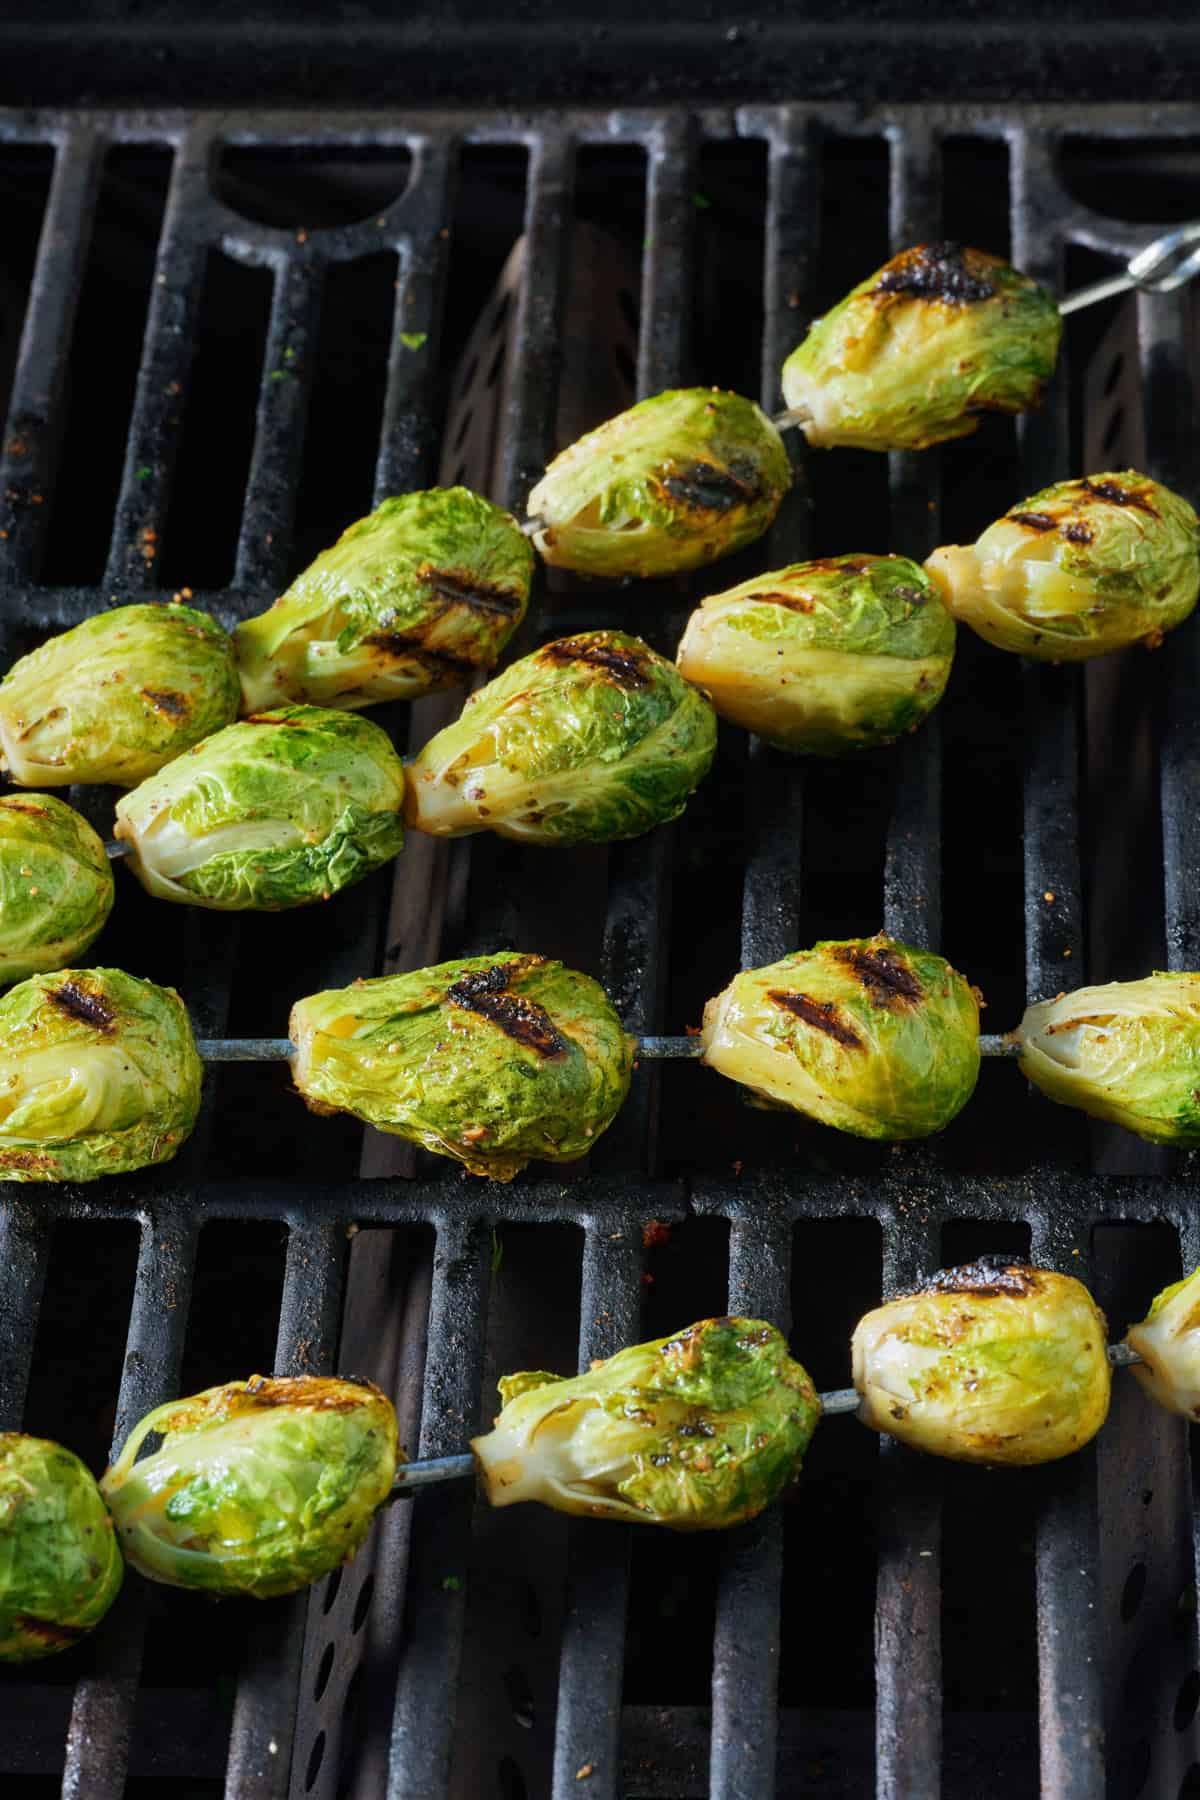 Brussels sprouts on skewers after grilling.